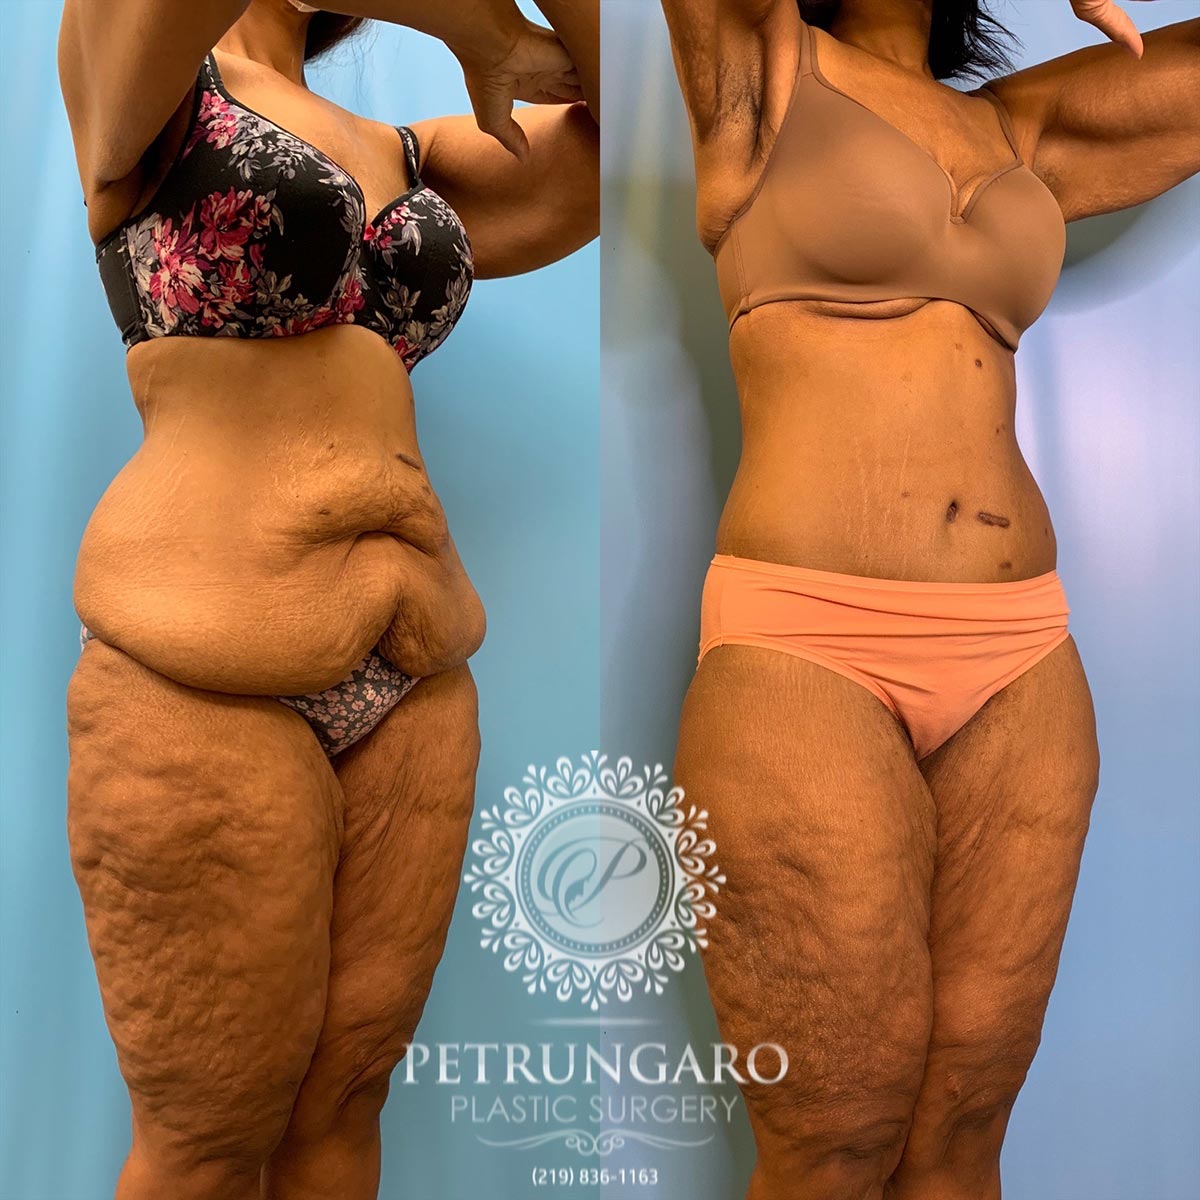 42 year old woman 3 months after a circumferential body lift-4